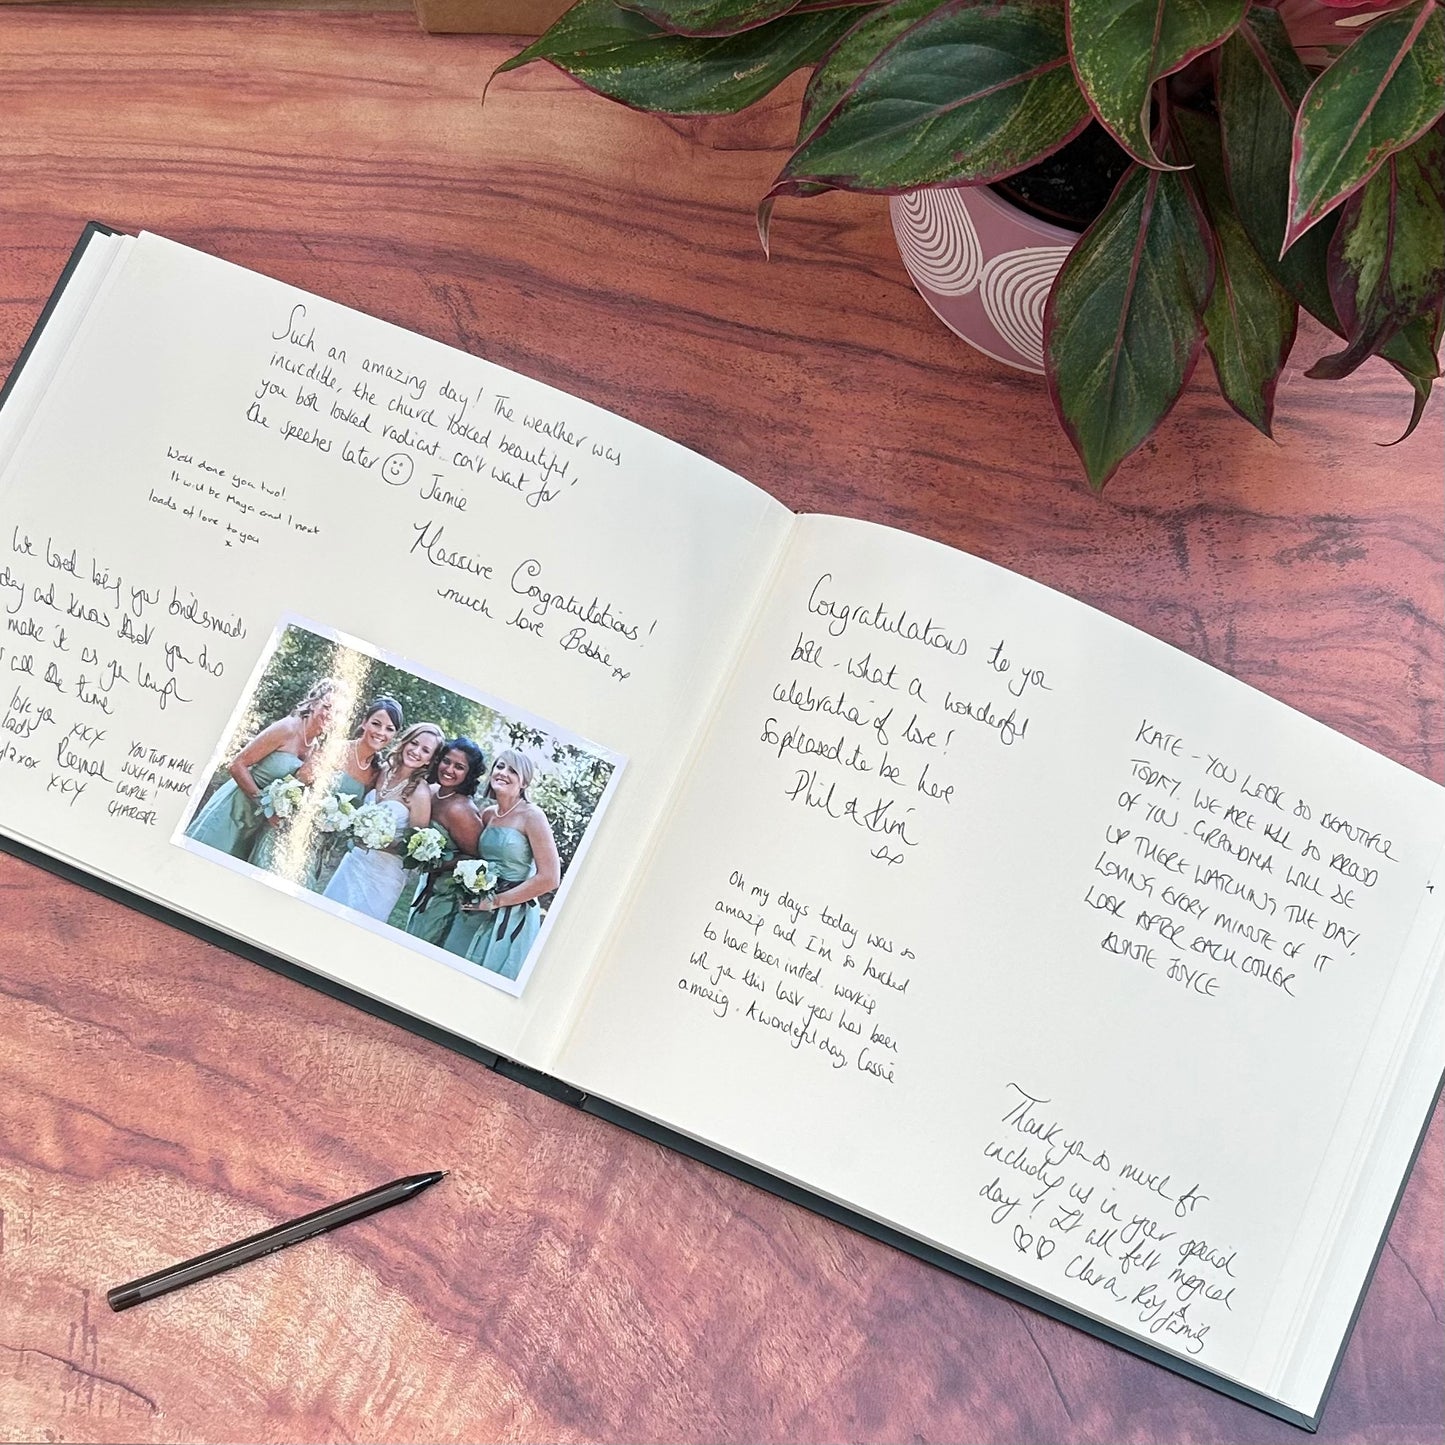 a large wedding guest book lies open on a coffee table. It is full of handwritten messages from wedding guests